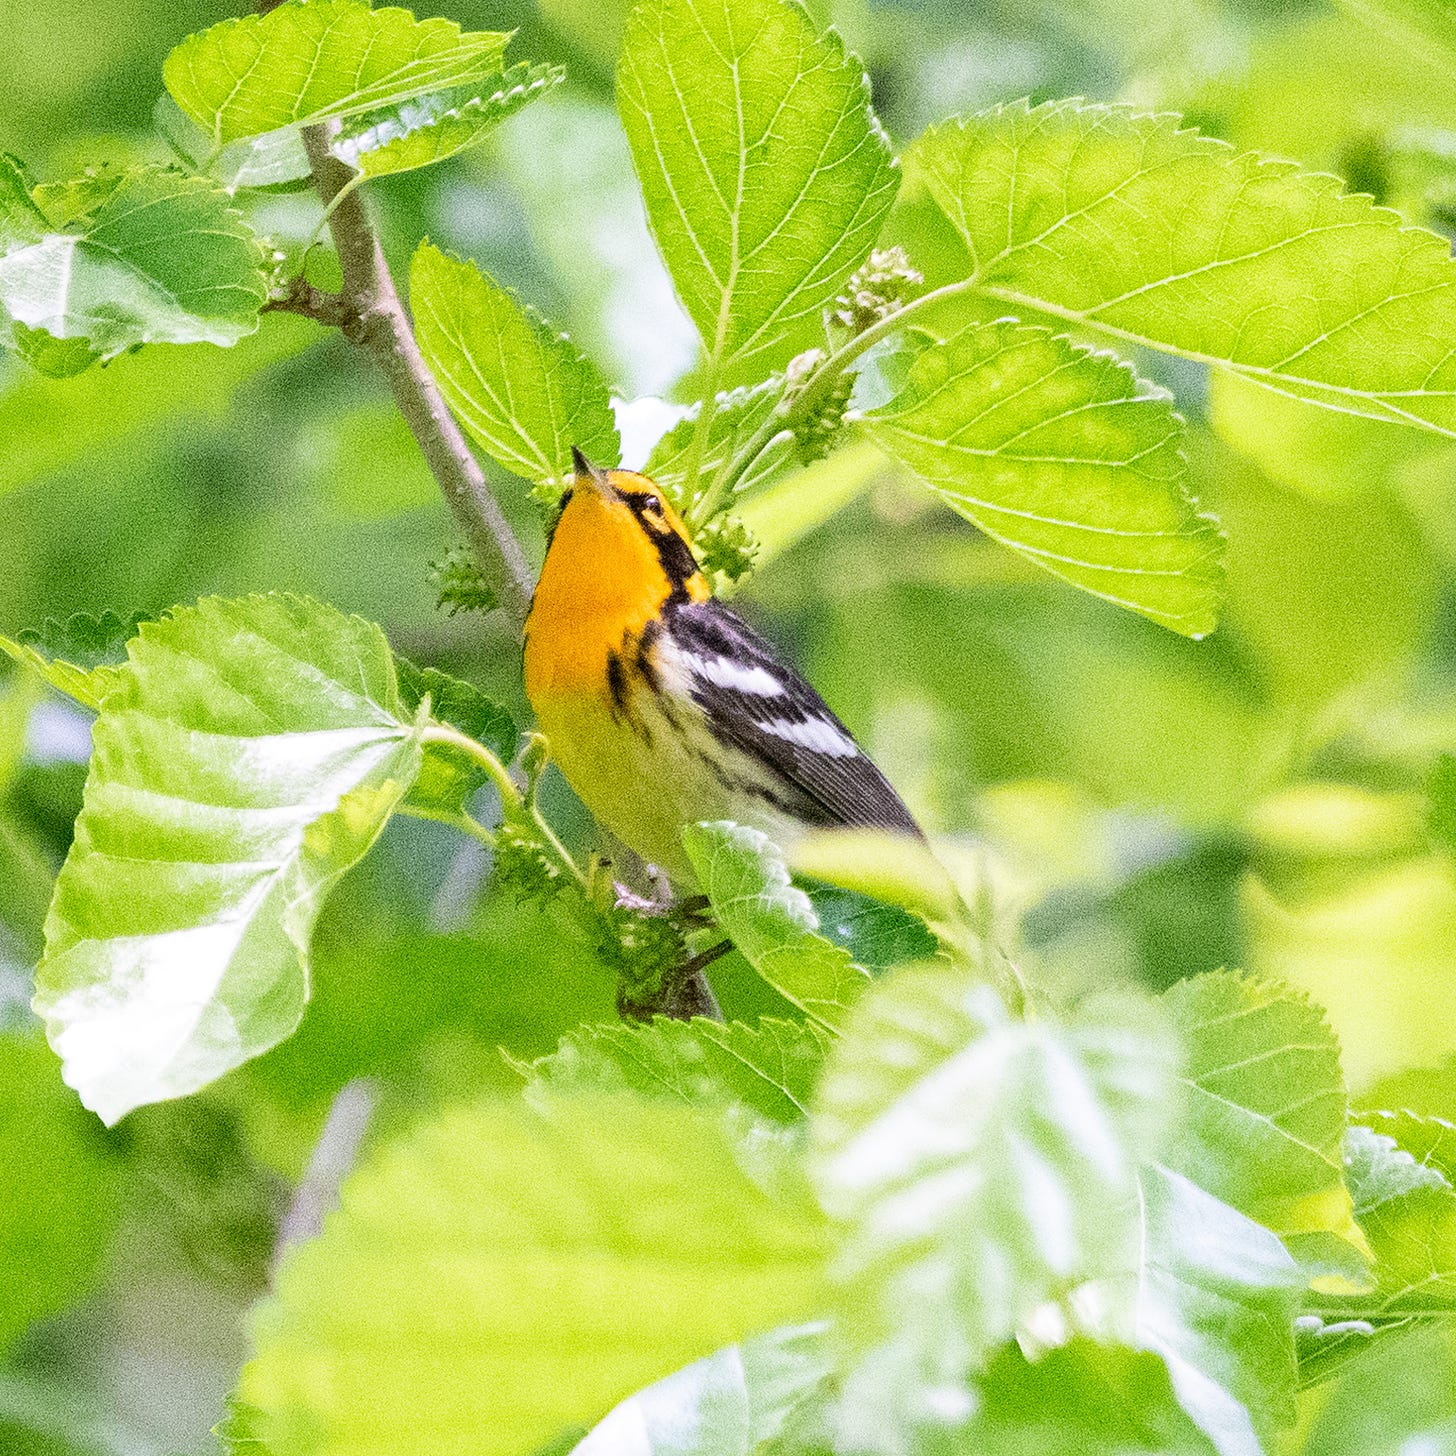 A Blackburnian warbler, with a bright orange throat and forehead